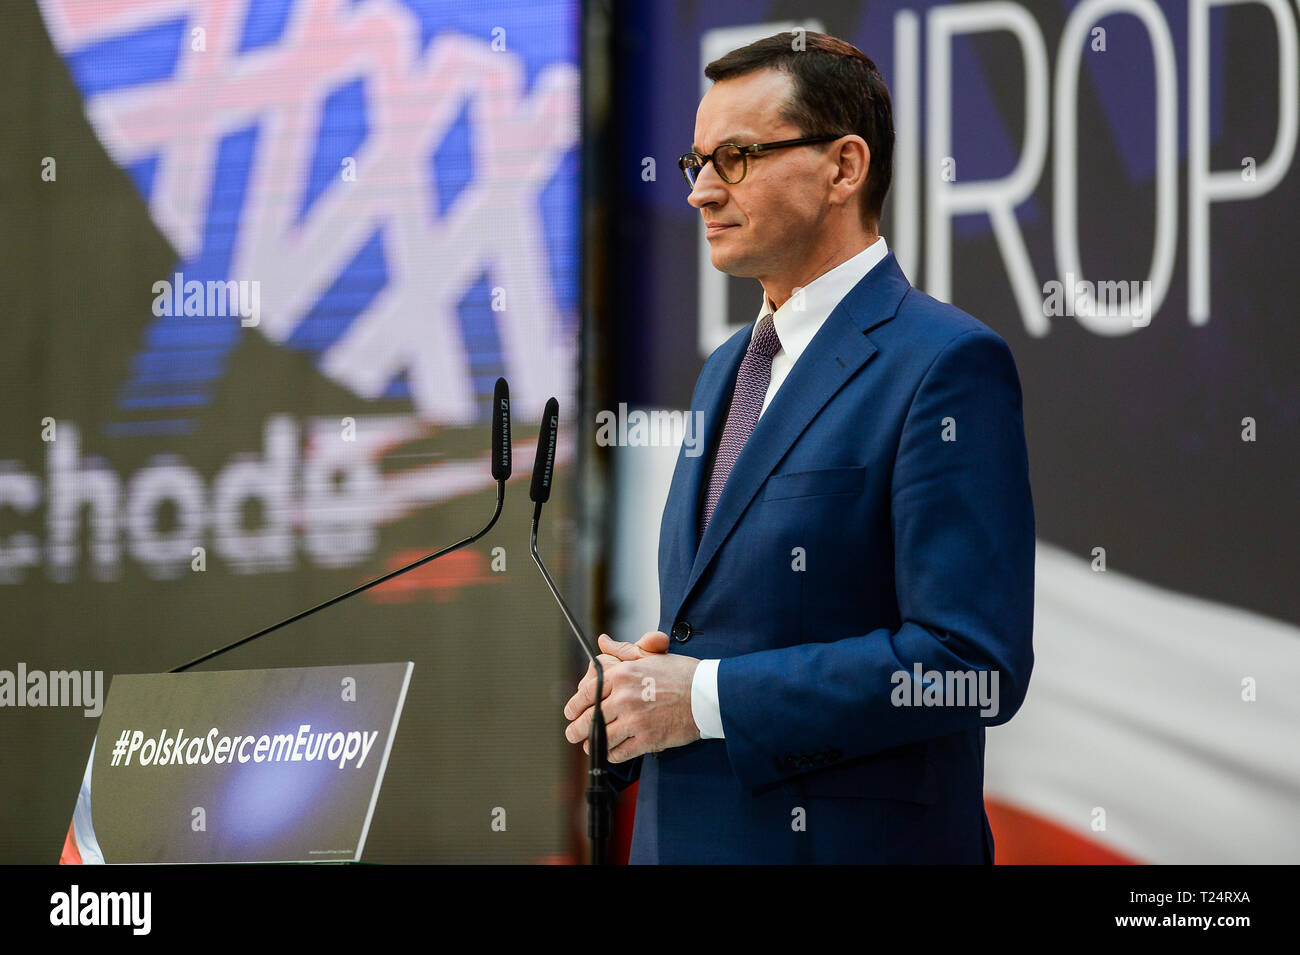 Prime Minister Mateusz Morawiecki seen speaking during the Law and Justice (Prawo i Sprawiedliwosc) convention. Stock Photo